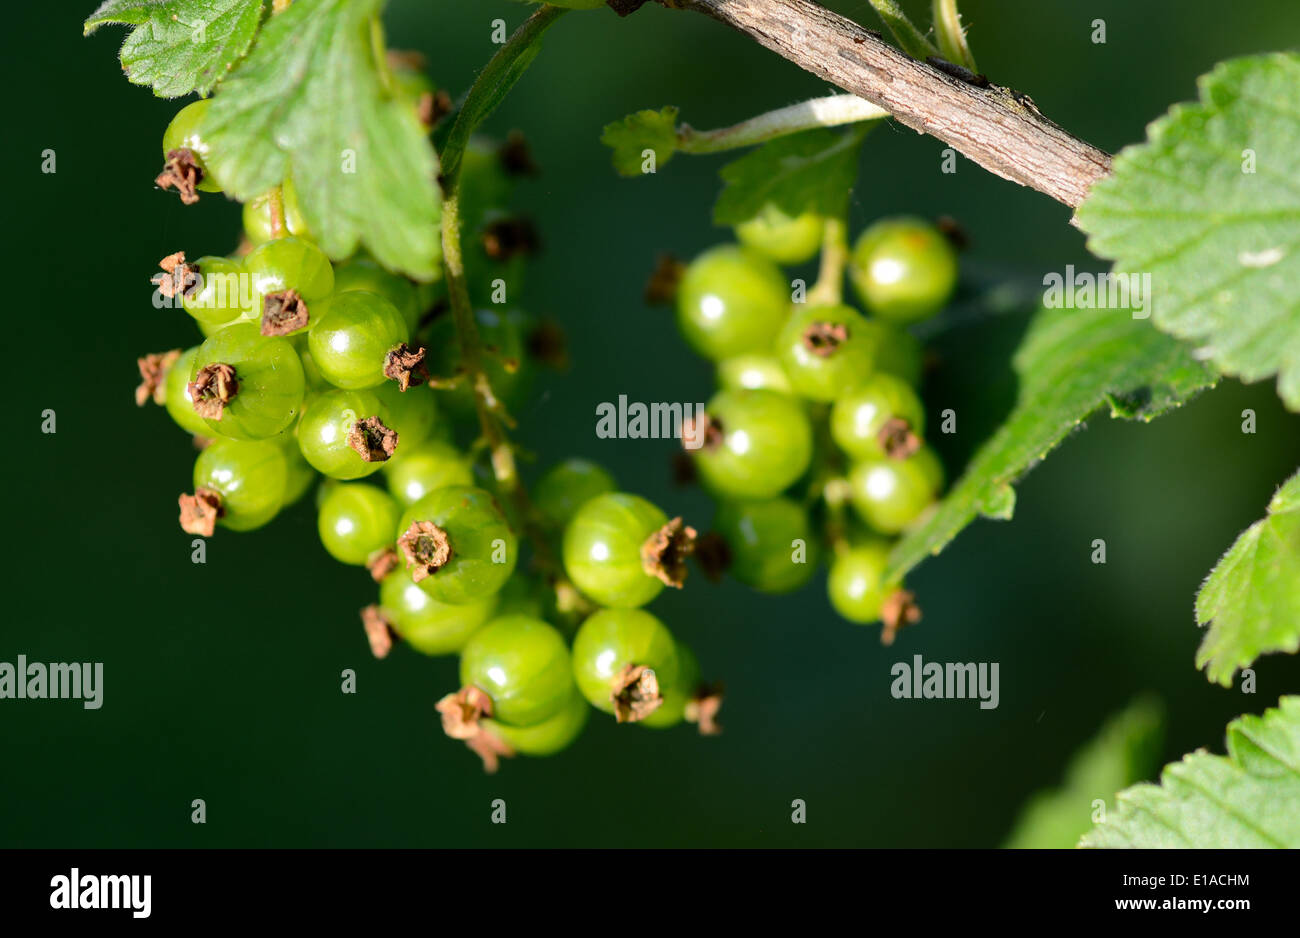 Unripe green currant fruit hanging on the twig. Stock Photo